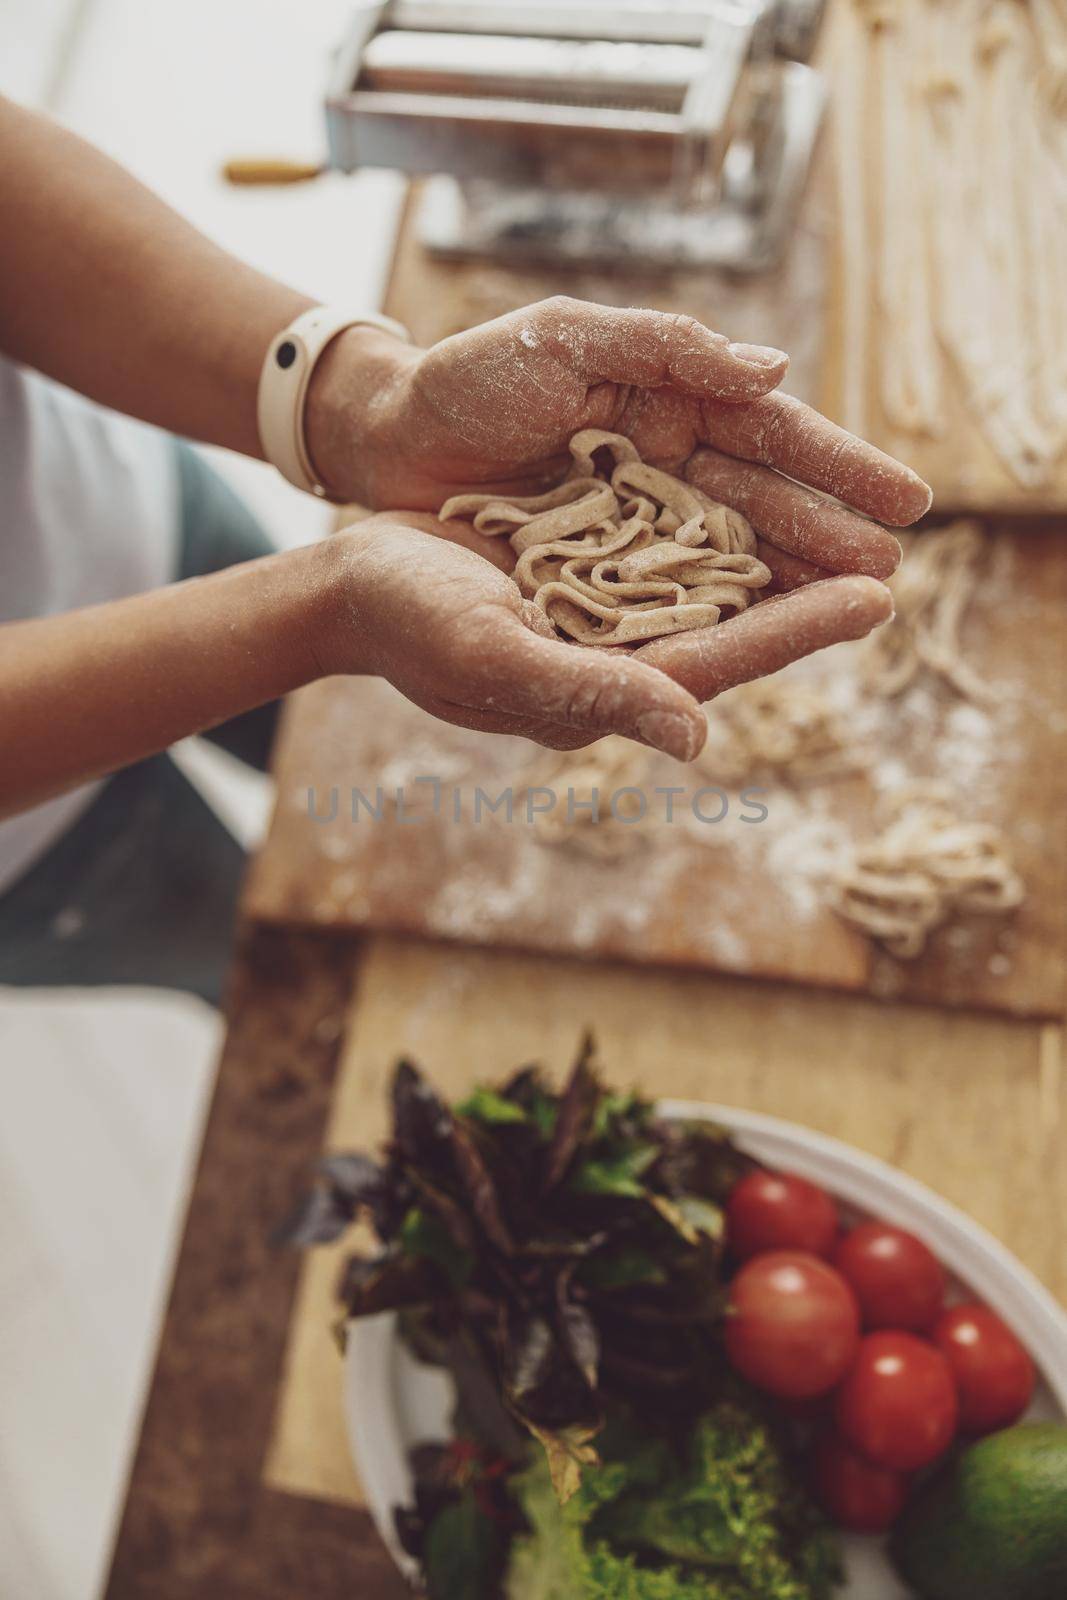 Homemade noodles cooked by a woman in her kitchen from quality flour